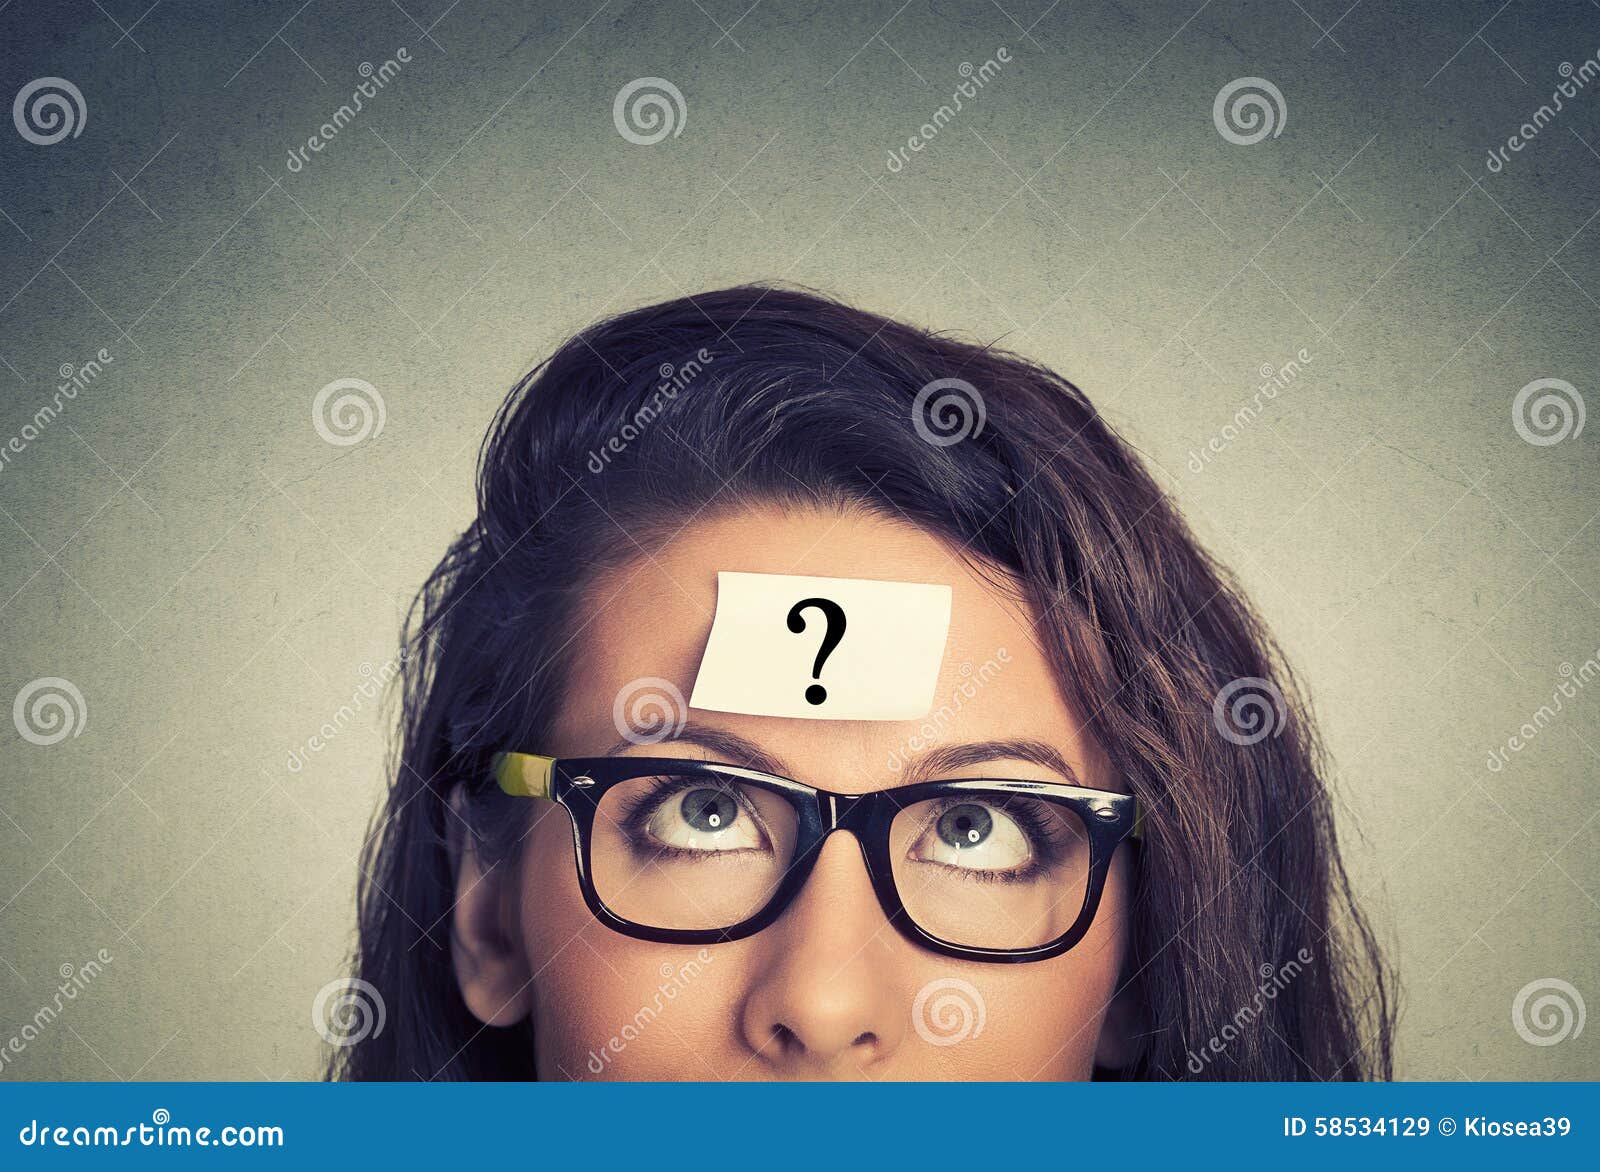 thinking woman with question mark